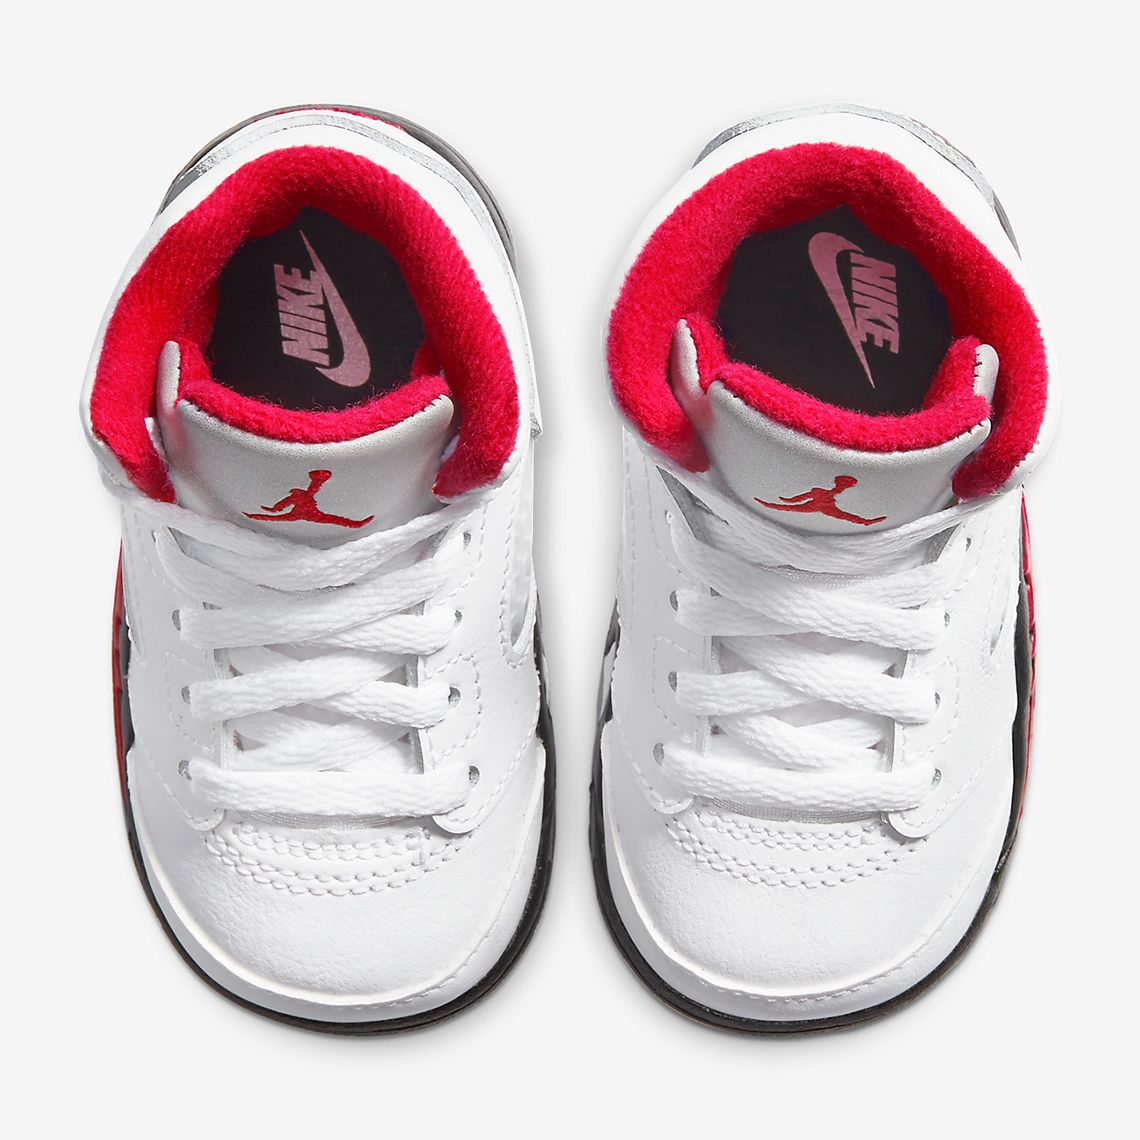 air Red-Stealth jordan 5 white cement 136027 104 customs become official